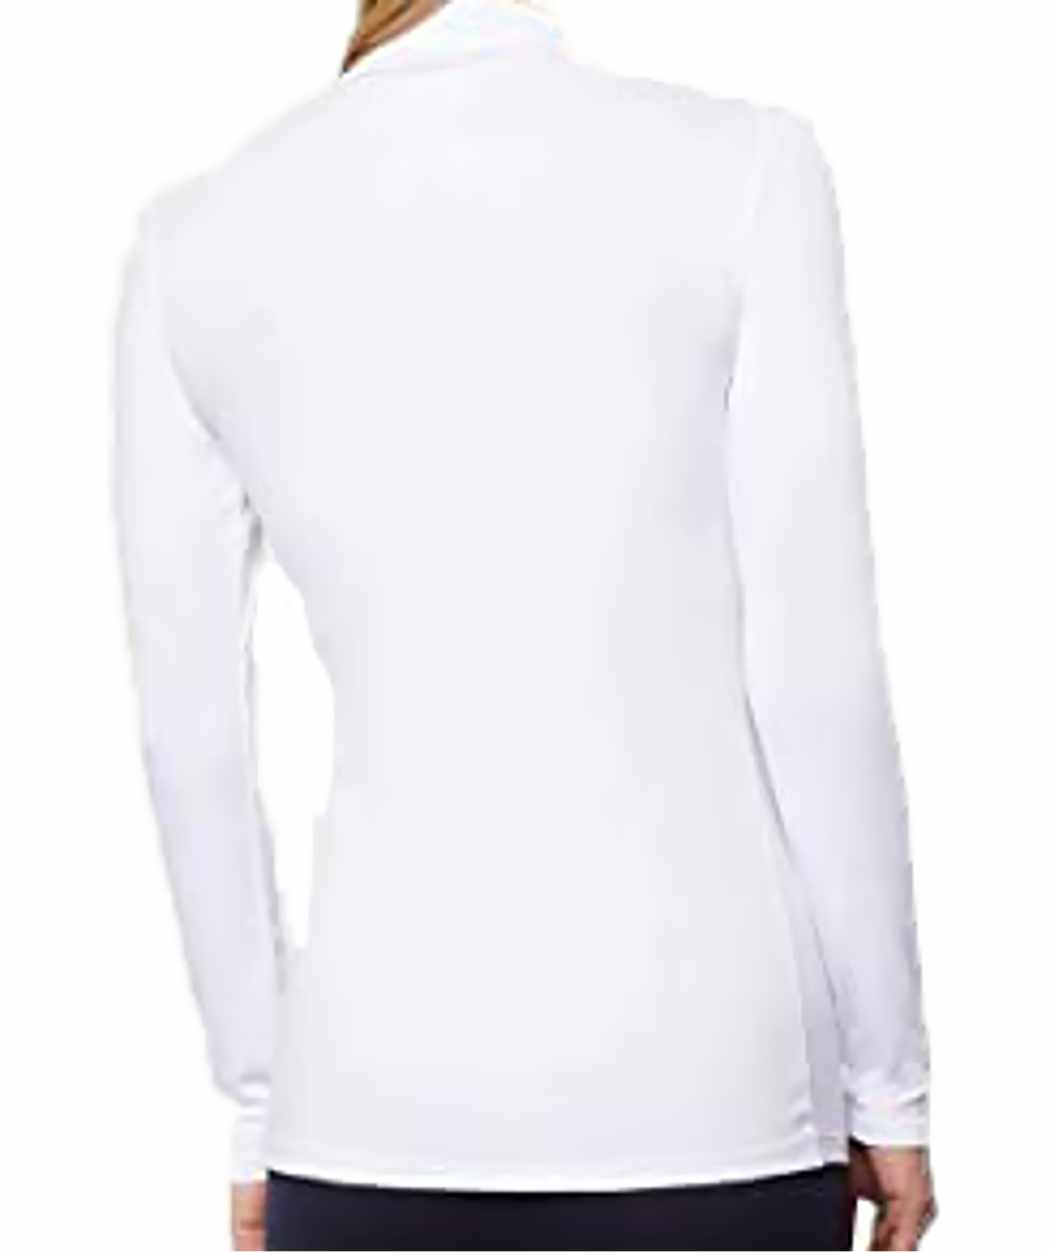 32 DEGREES Womens Base Layer Mock-Neck Top